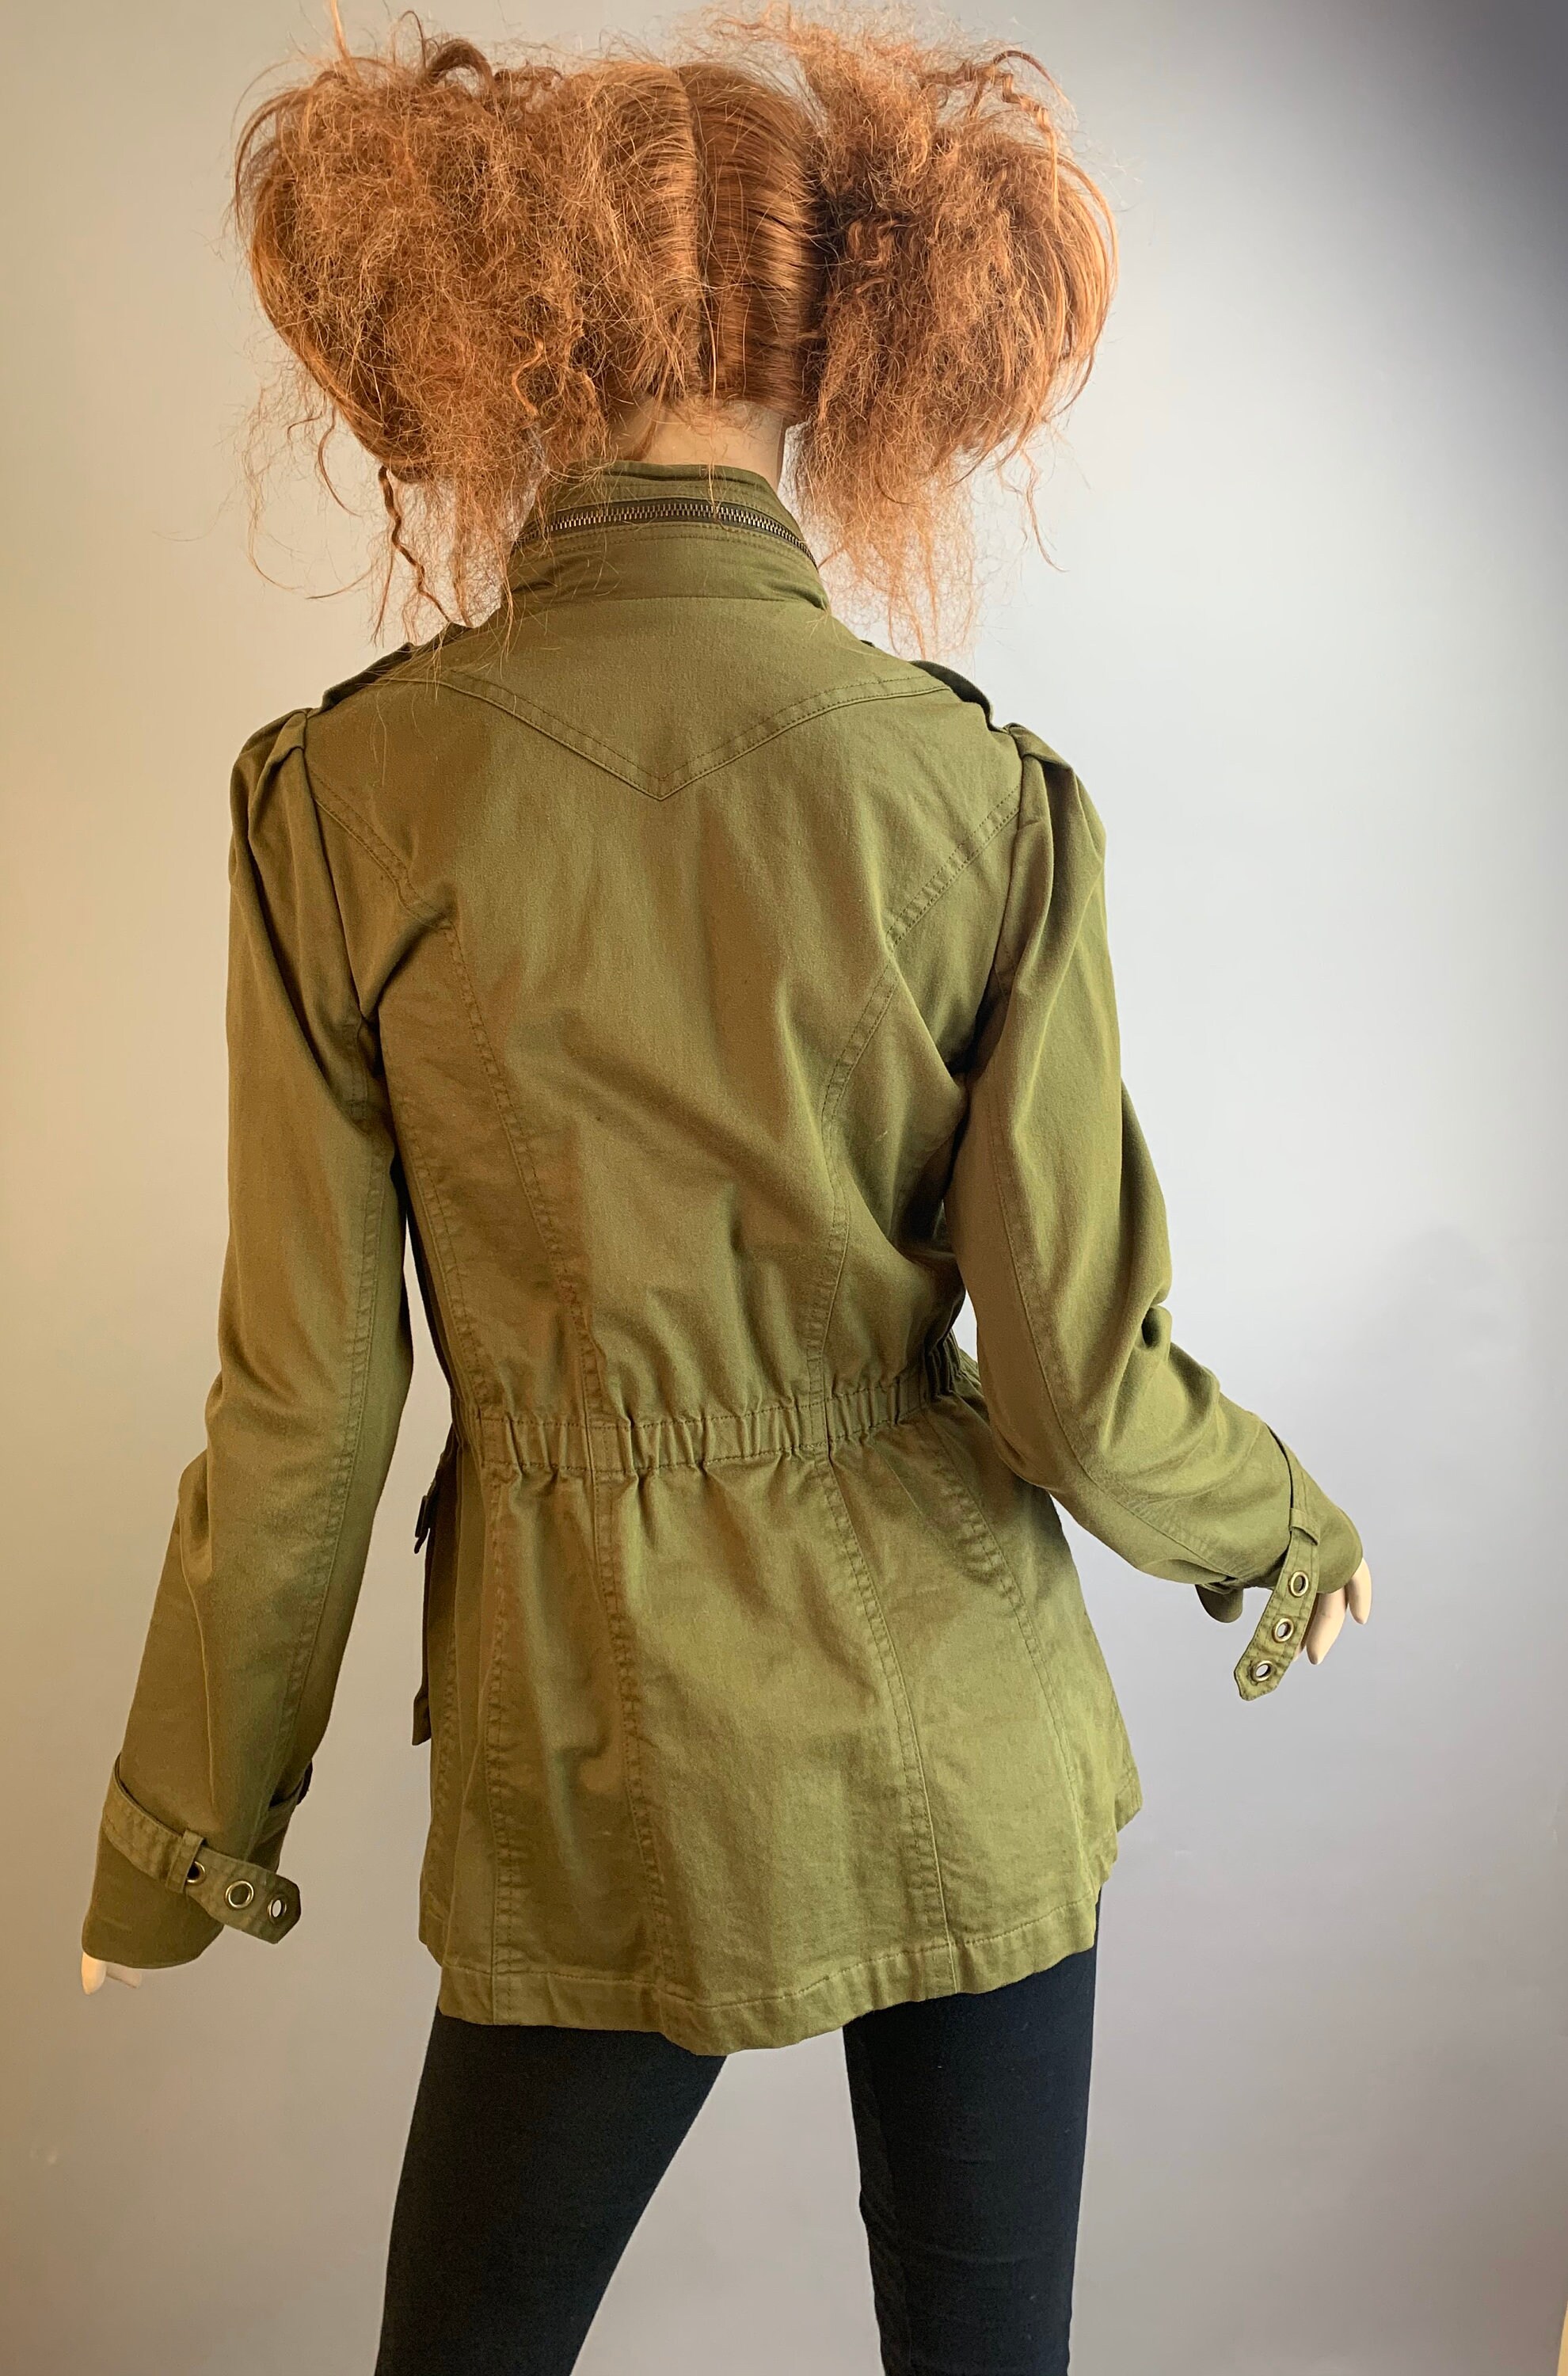 military jacket レトロ vintage 90s ヴィンテージ